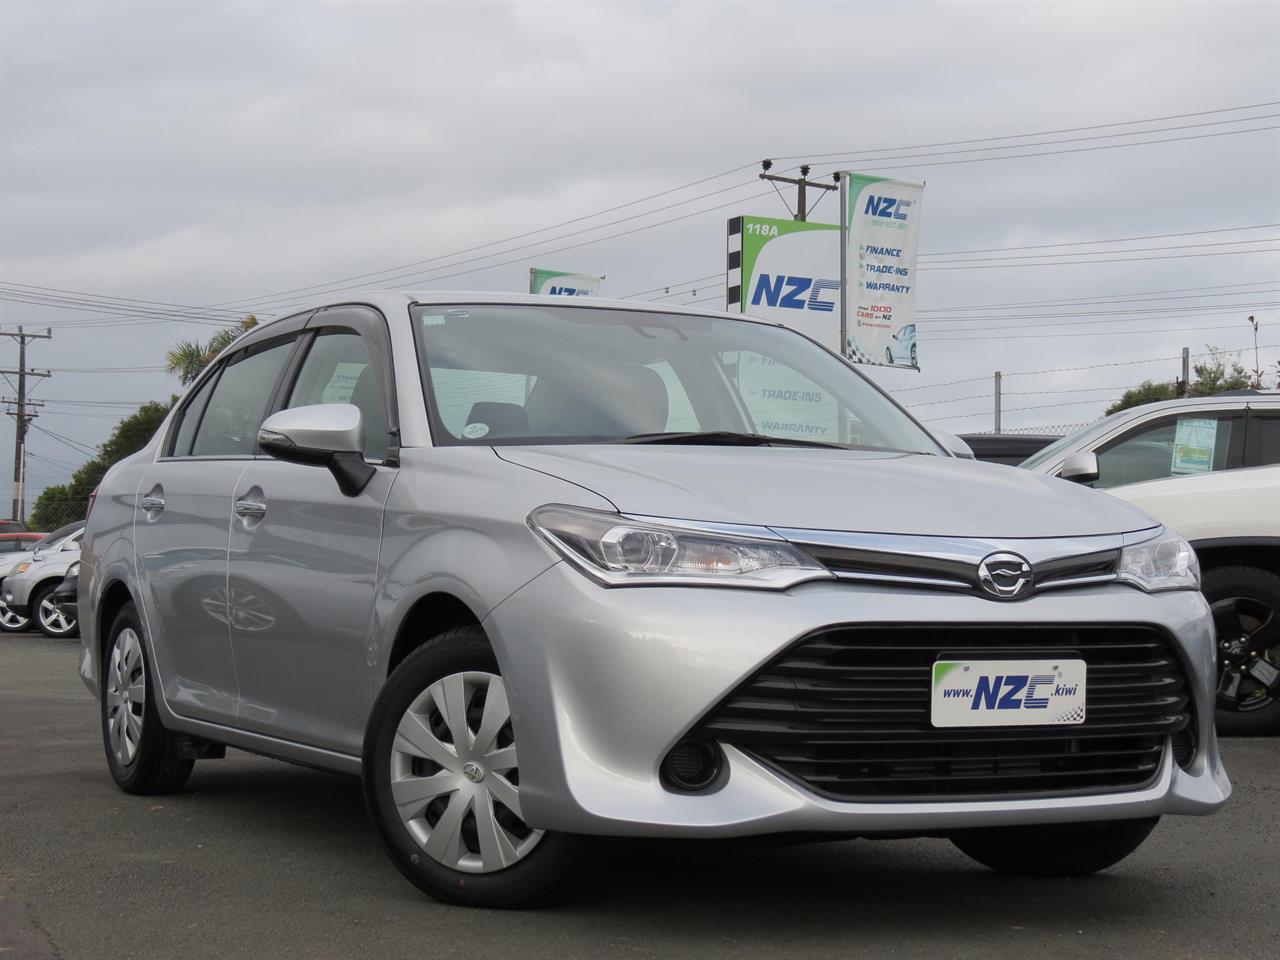 NZC best hot price for 2016 Toyota Corolla in Auckland